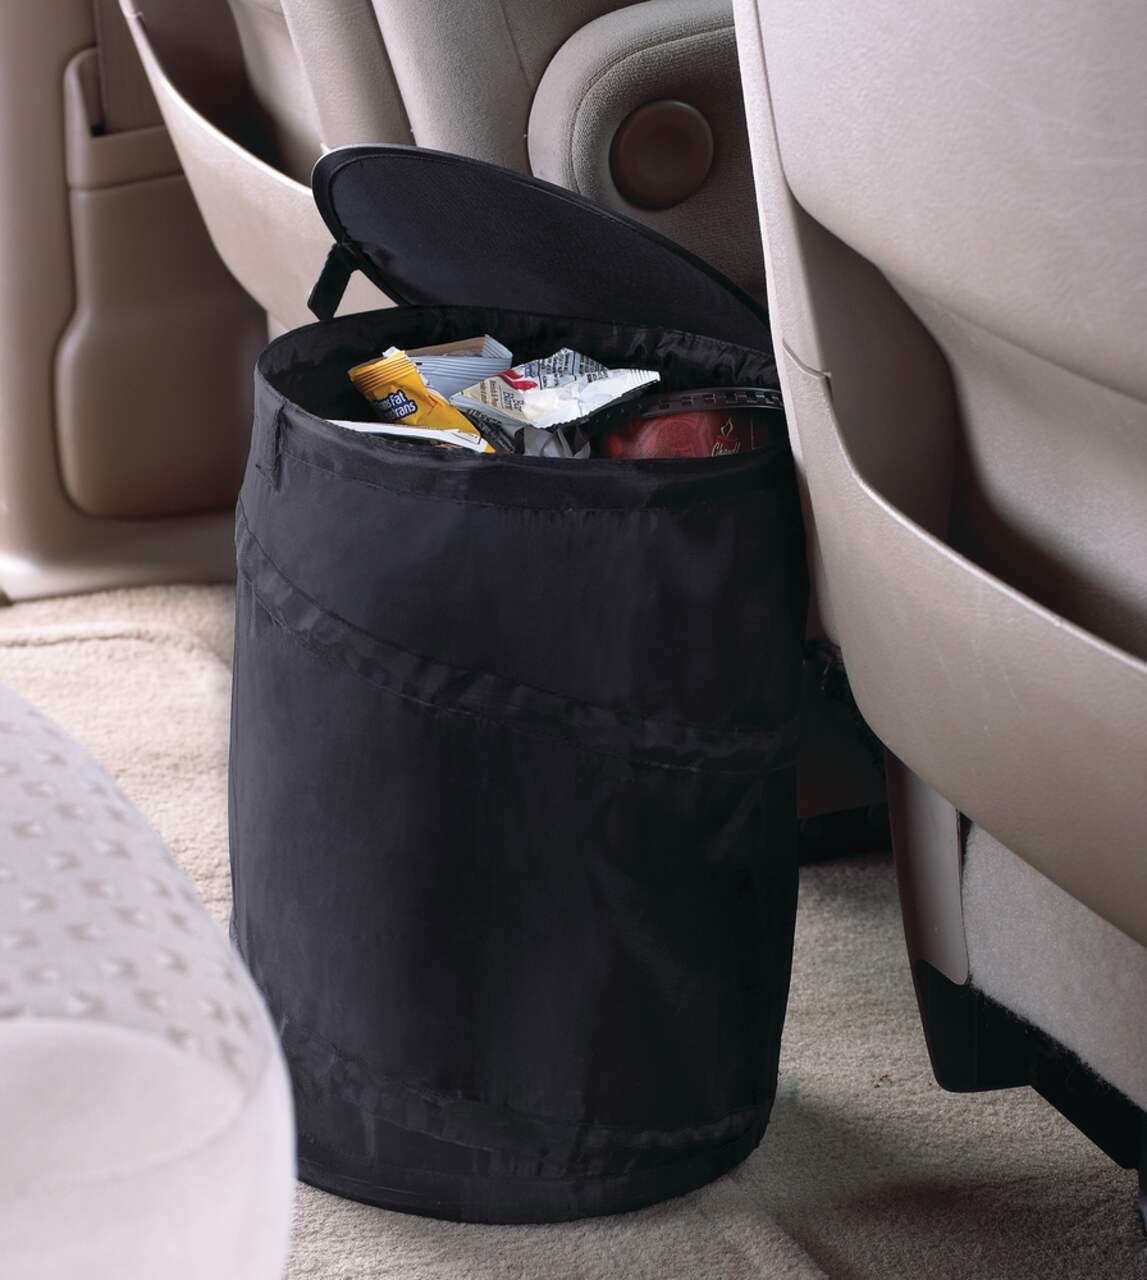 https://media-www.canadiantire.ca/product/automotive/car-care-accessories/auto-accessories/0371547/auto-trends-collapsible-trash-can-organizer-06237e1e-4a10-4d8b-89d4-4eb7a25c84d6.png?imdensity=1&imwidth=1244&impolicy=mZoom